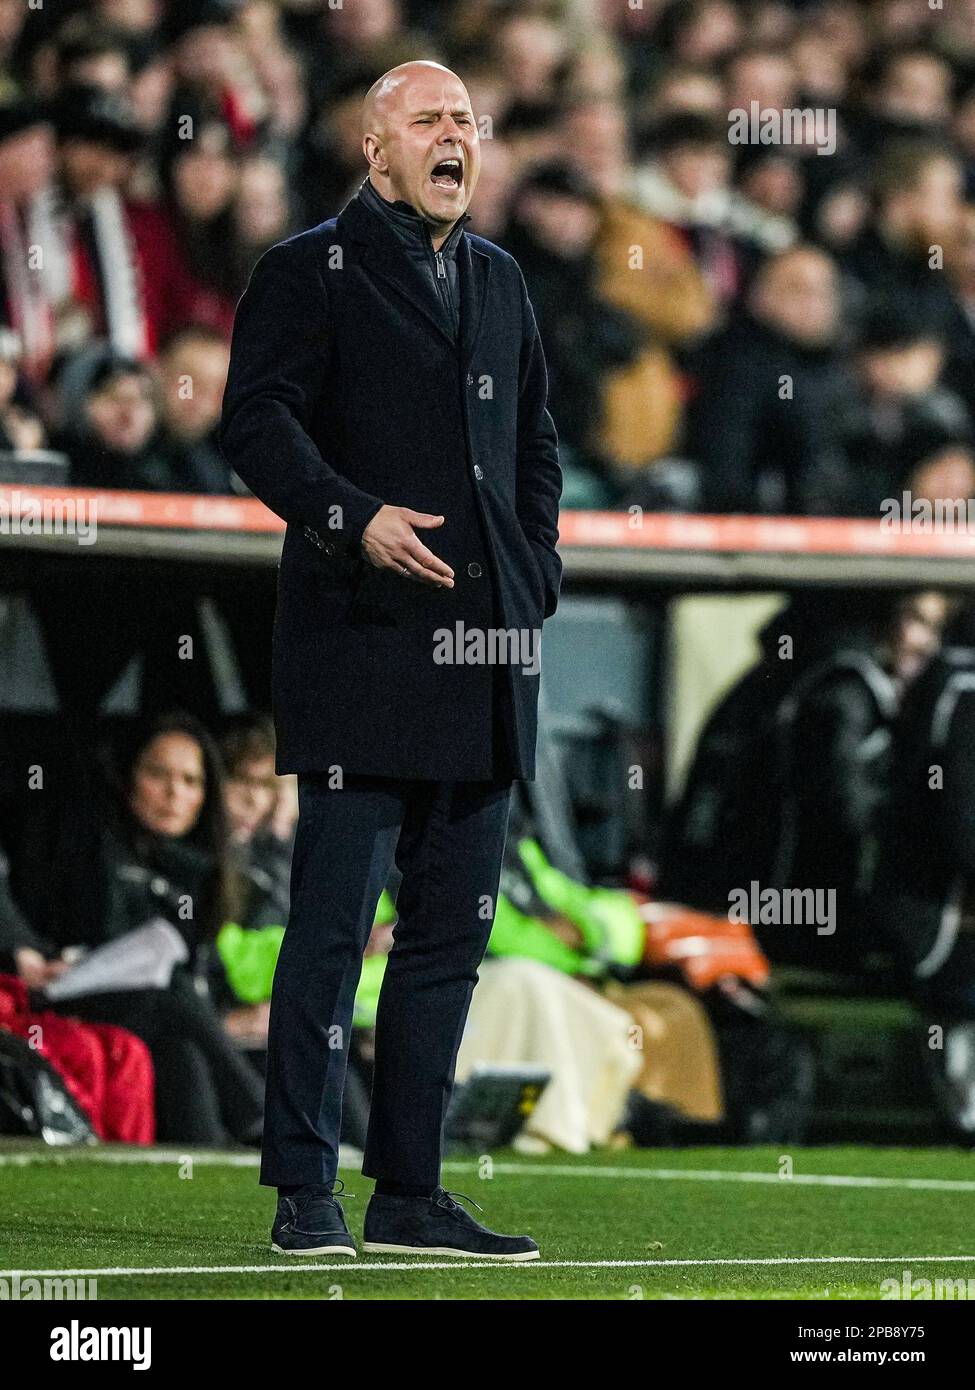 Rotterdam - Feyenoord coach Arne Slot during the match between Feyenoord v  FC Volendam at Stadion Feijenoord De Kuip on 12 March 2023 in Rotterdam,  Netherlands. (Box to Box Pictures/Tom Bode Stock